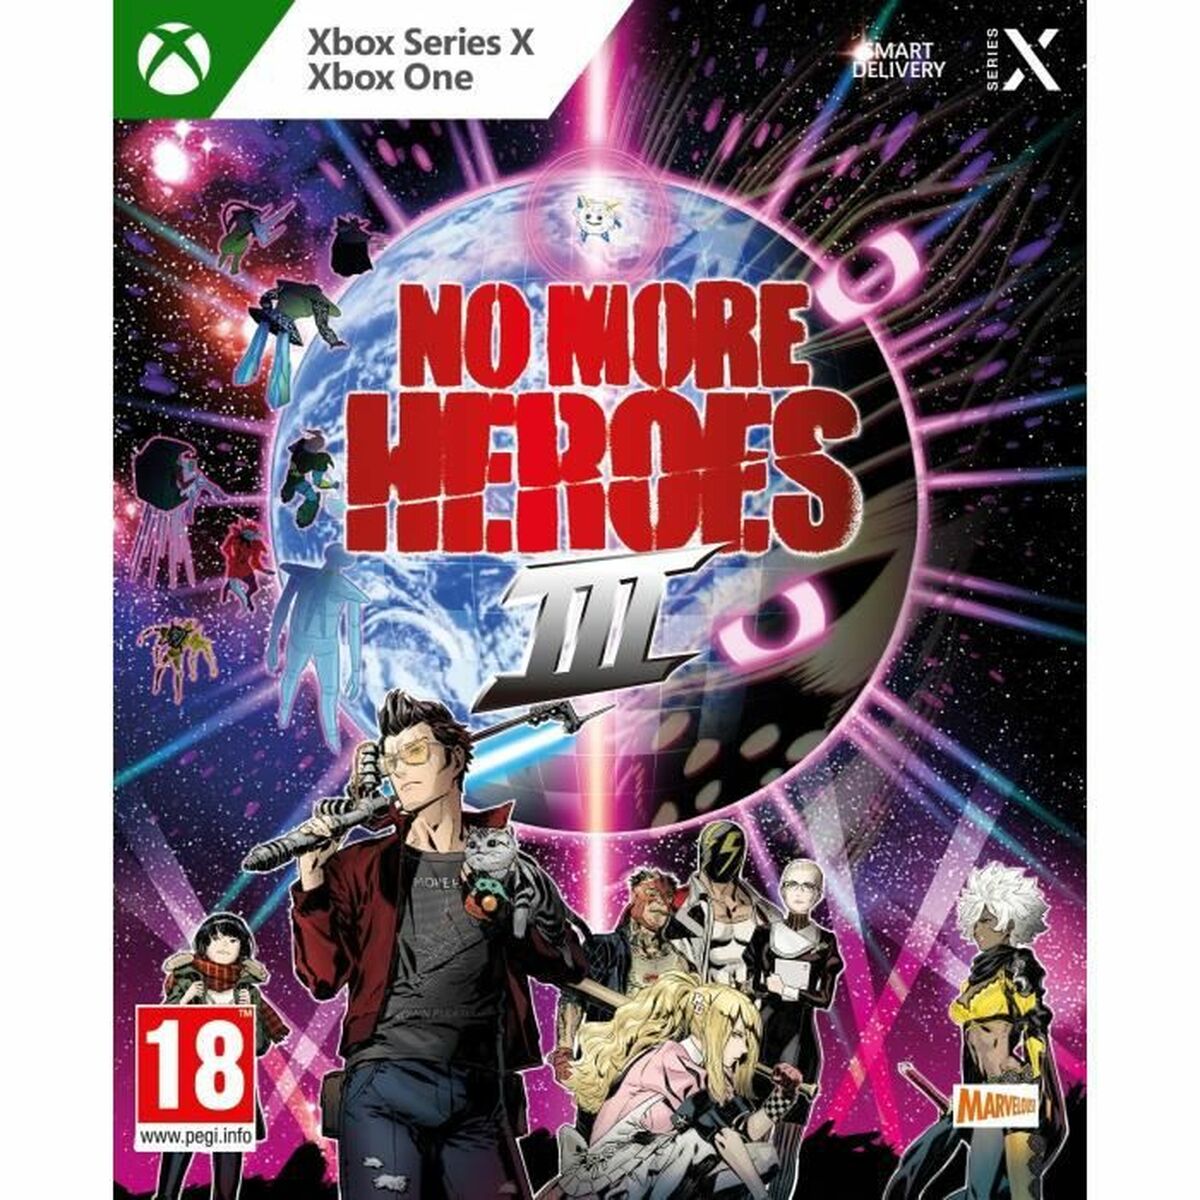 Jeu vidéo Xbox One Just For Games No more heroes III